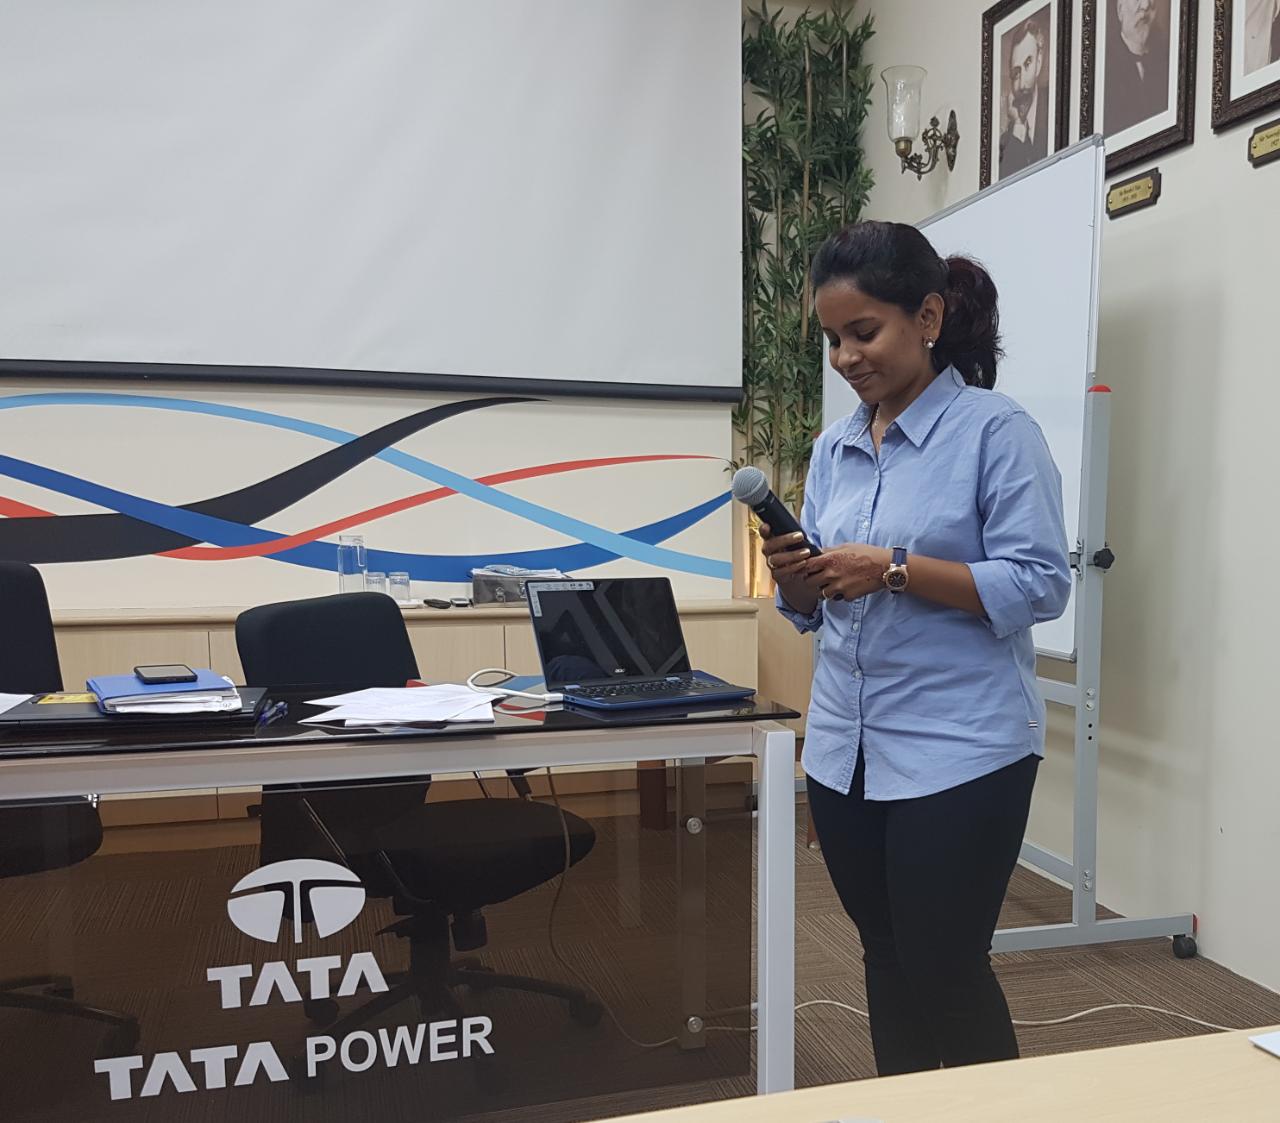 Awareness talk about bariatric surgery for the employees of Tata Power. Registered Dietician Mariam Lakdawala talking about nutritional tips for prevention of obesity especially for people who work in shifts.